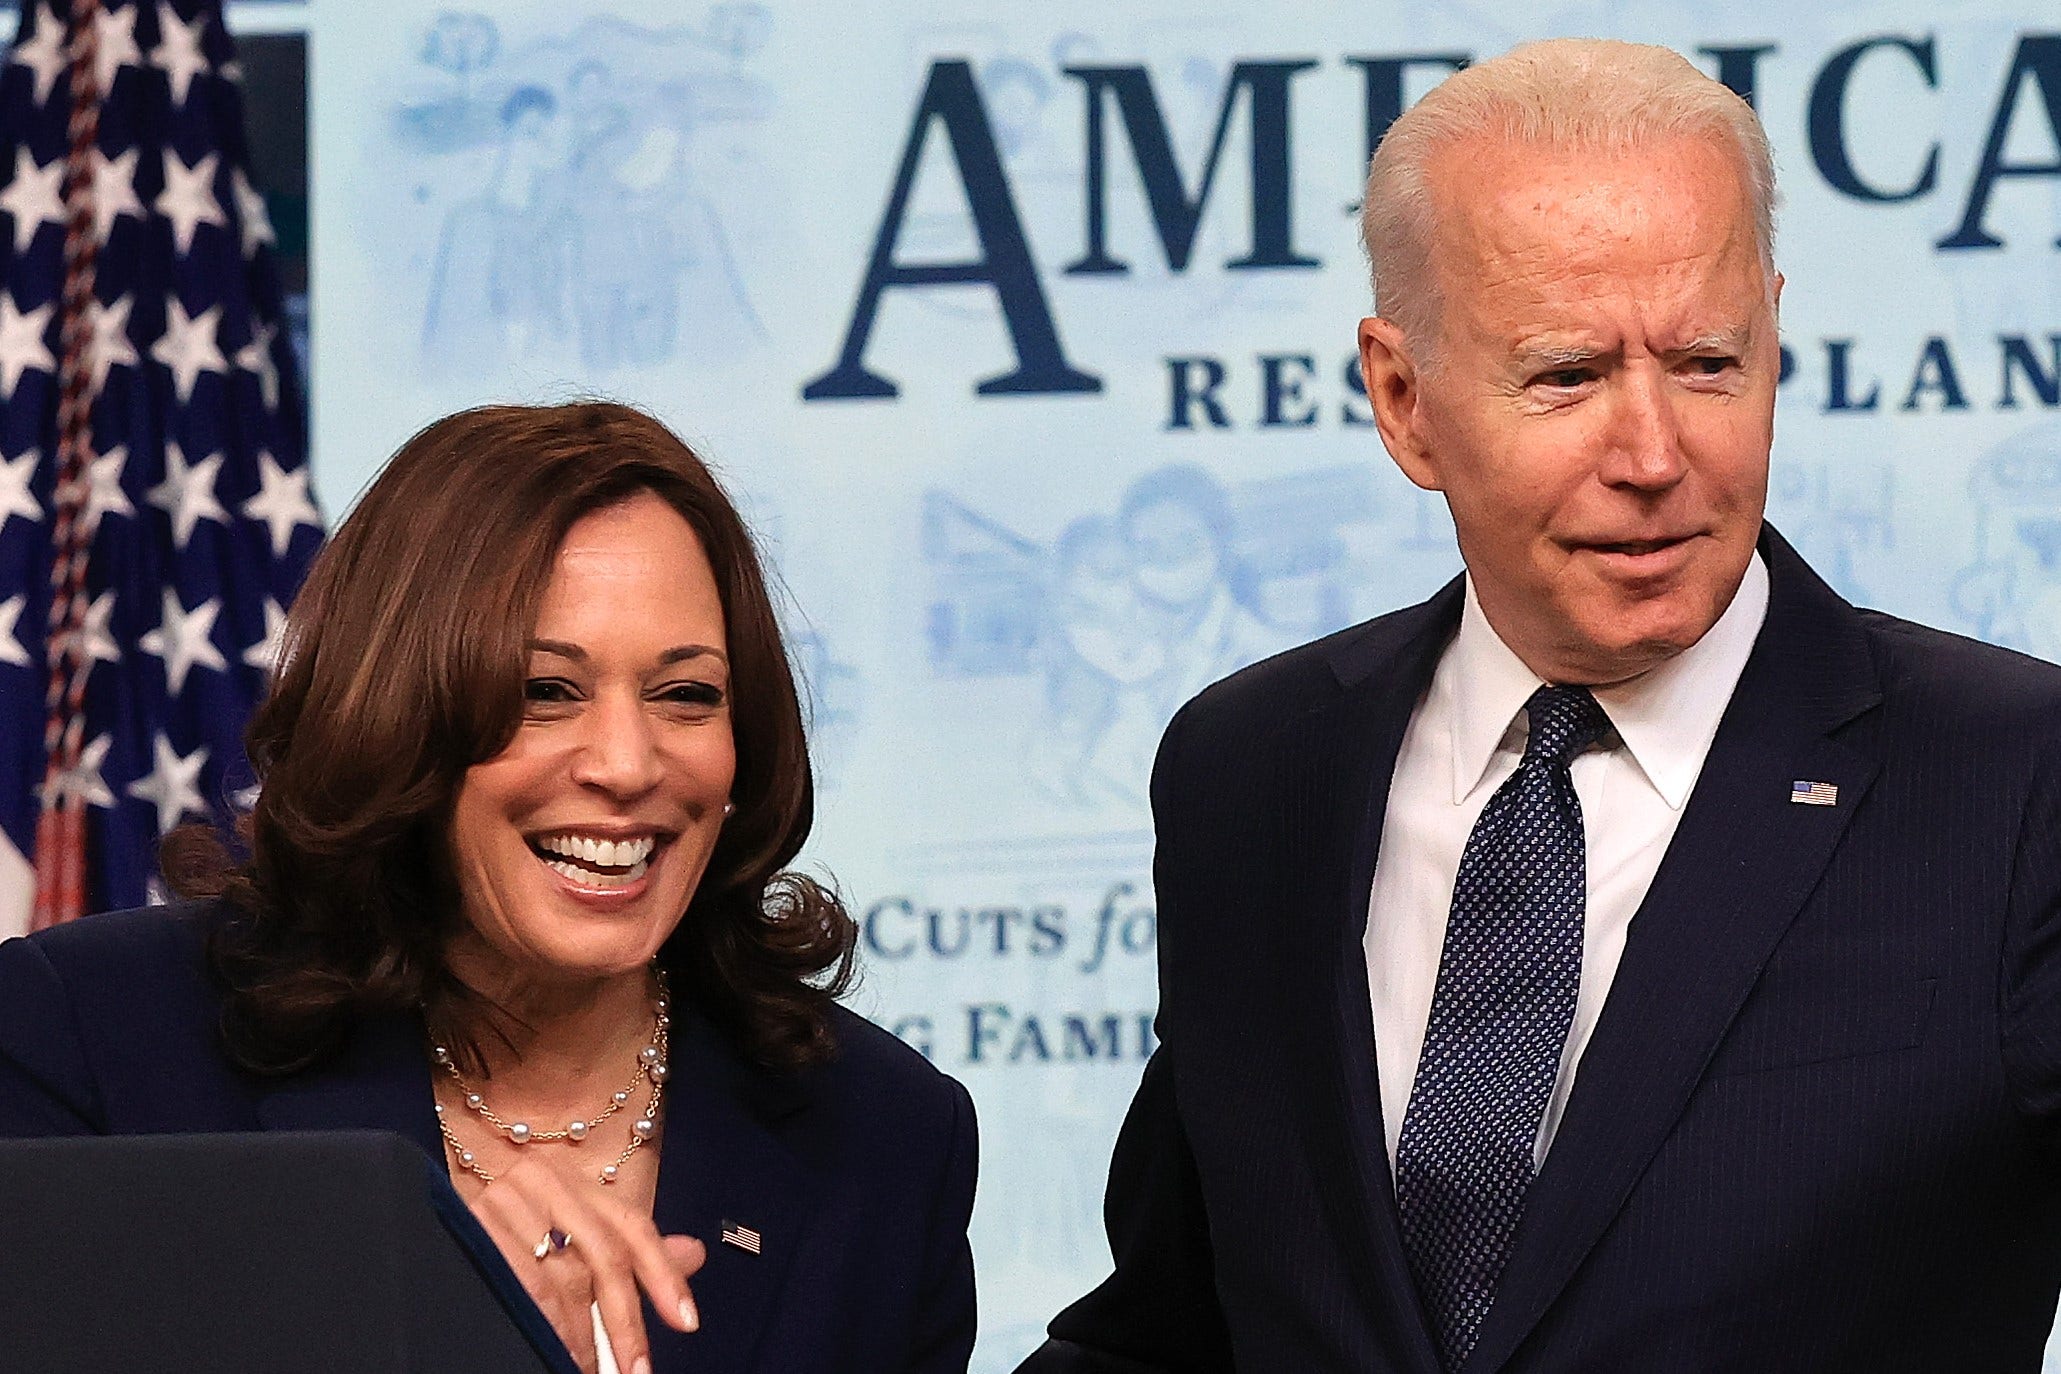 Dana Perino reacts to CNN's list of potential Biden replacements